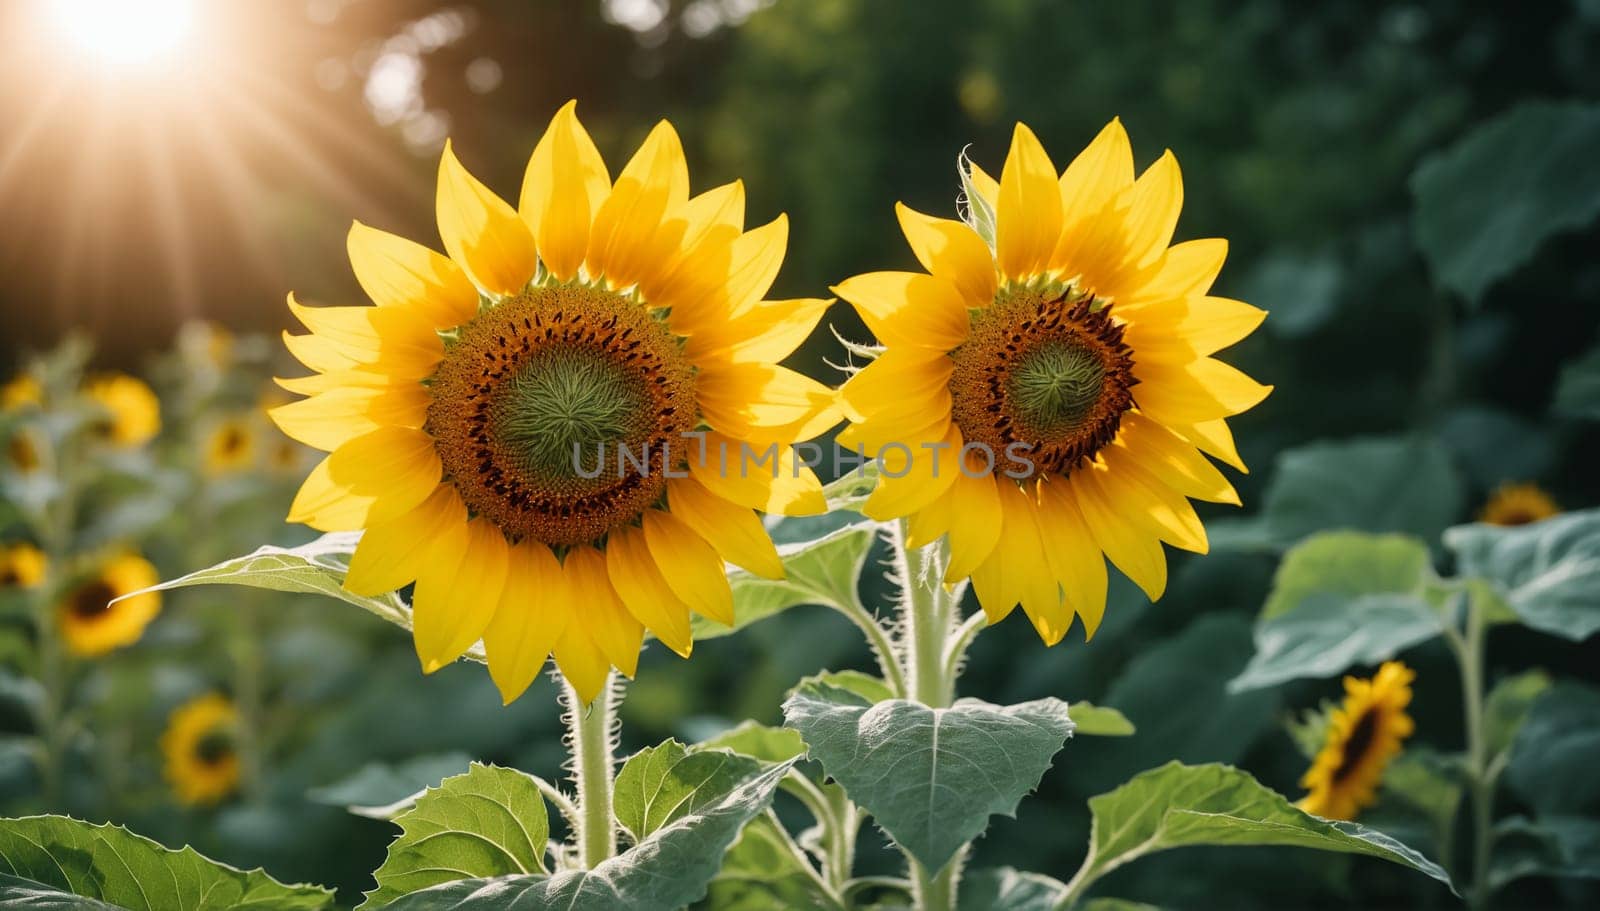 Sunflowers blooming in the field. Sunflower natural background by Andre1ns